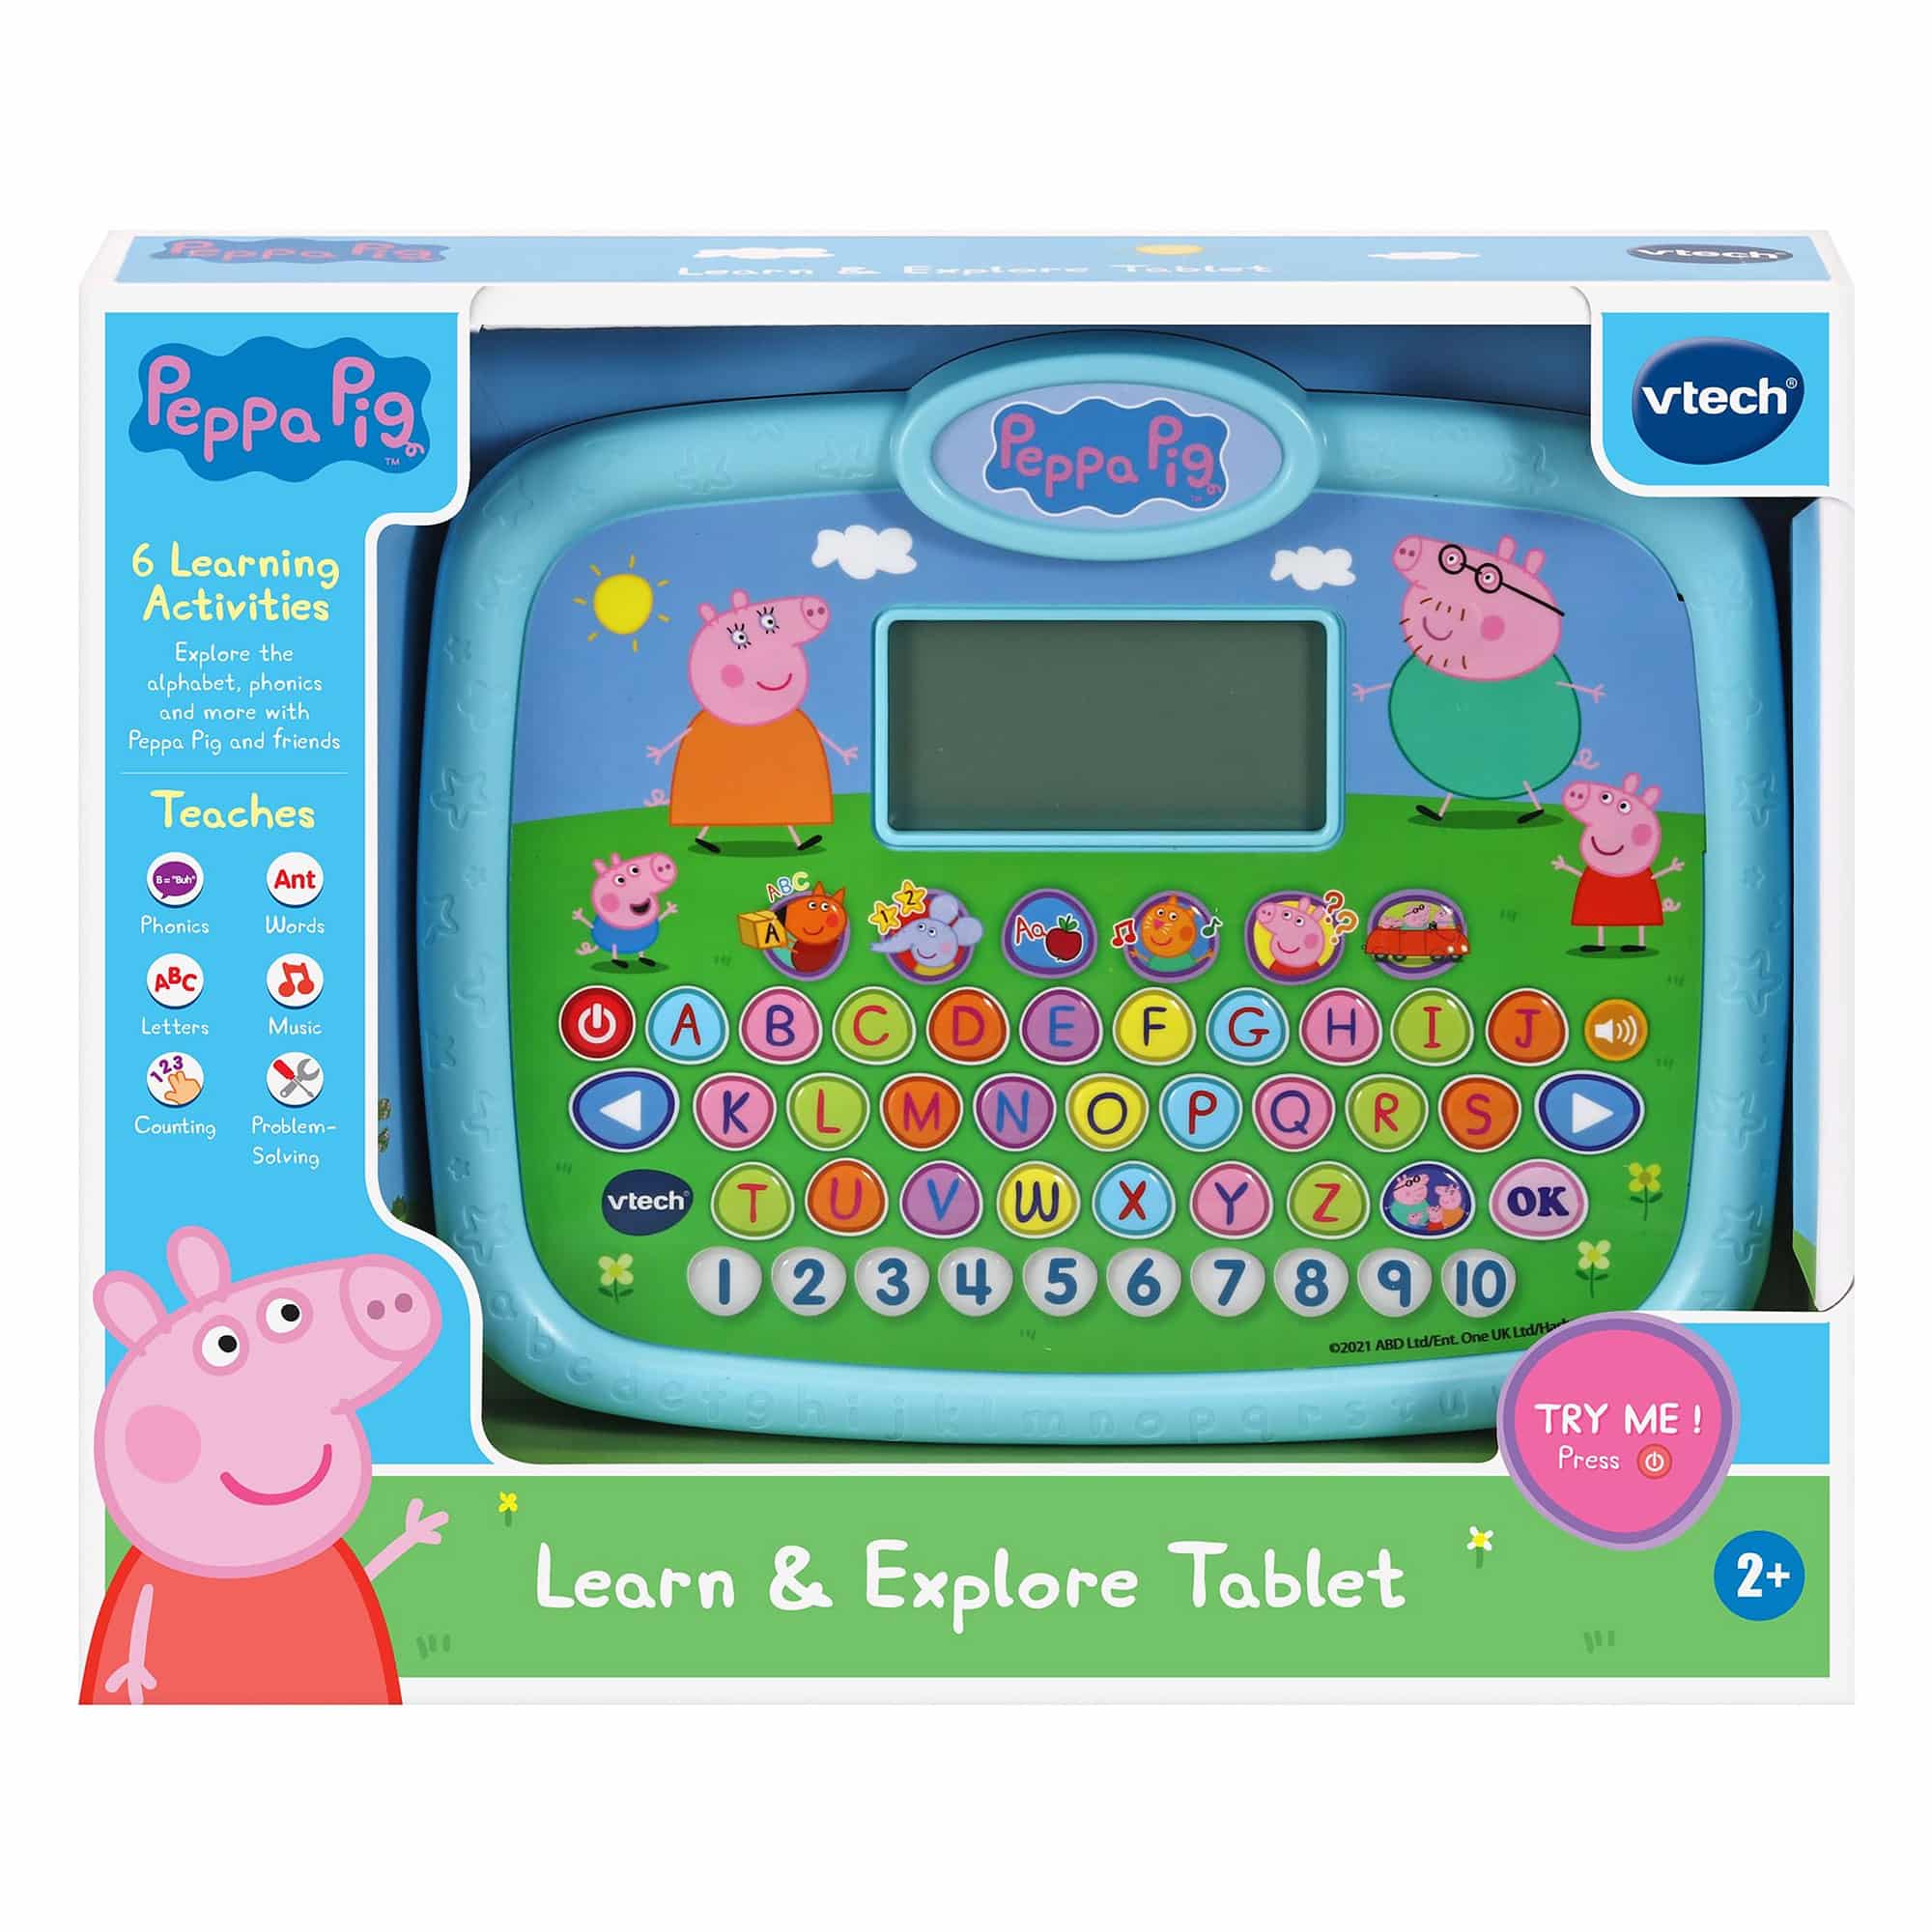 Vtech - Peppa Pig Learn & Explore Tablet